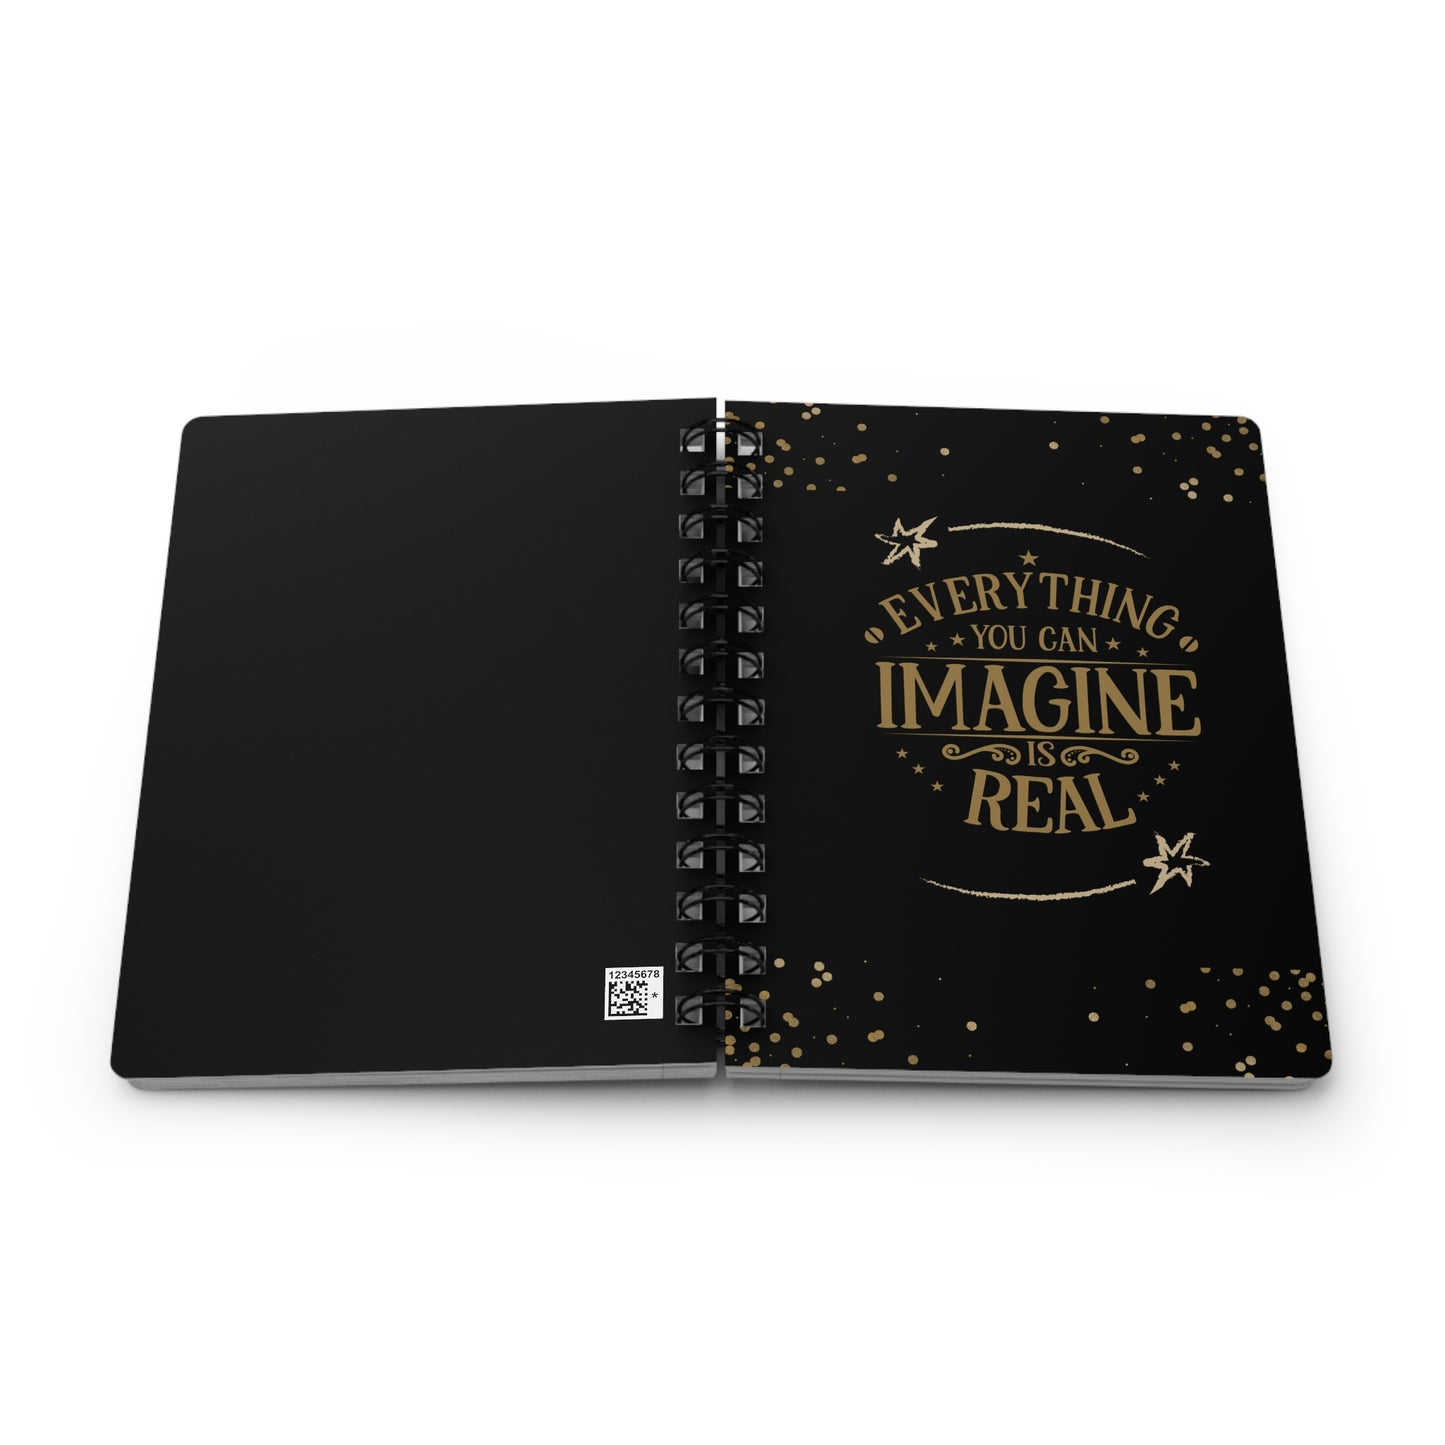 Everything you can Imagine is real, Journal, Notebook, Inspirational journal